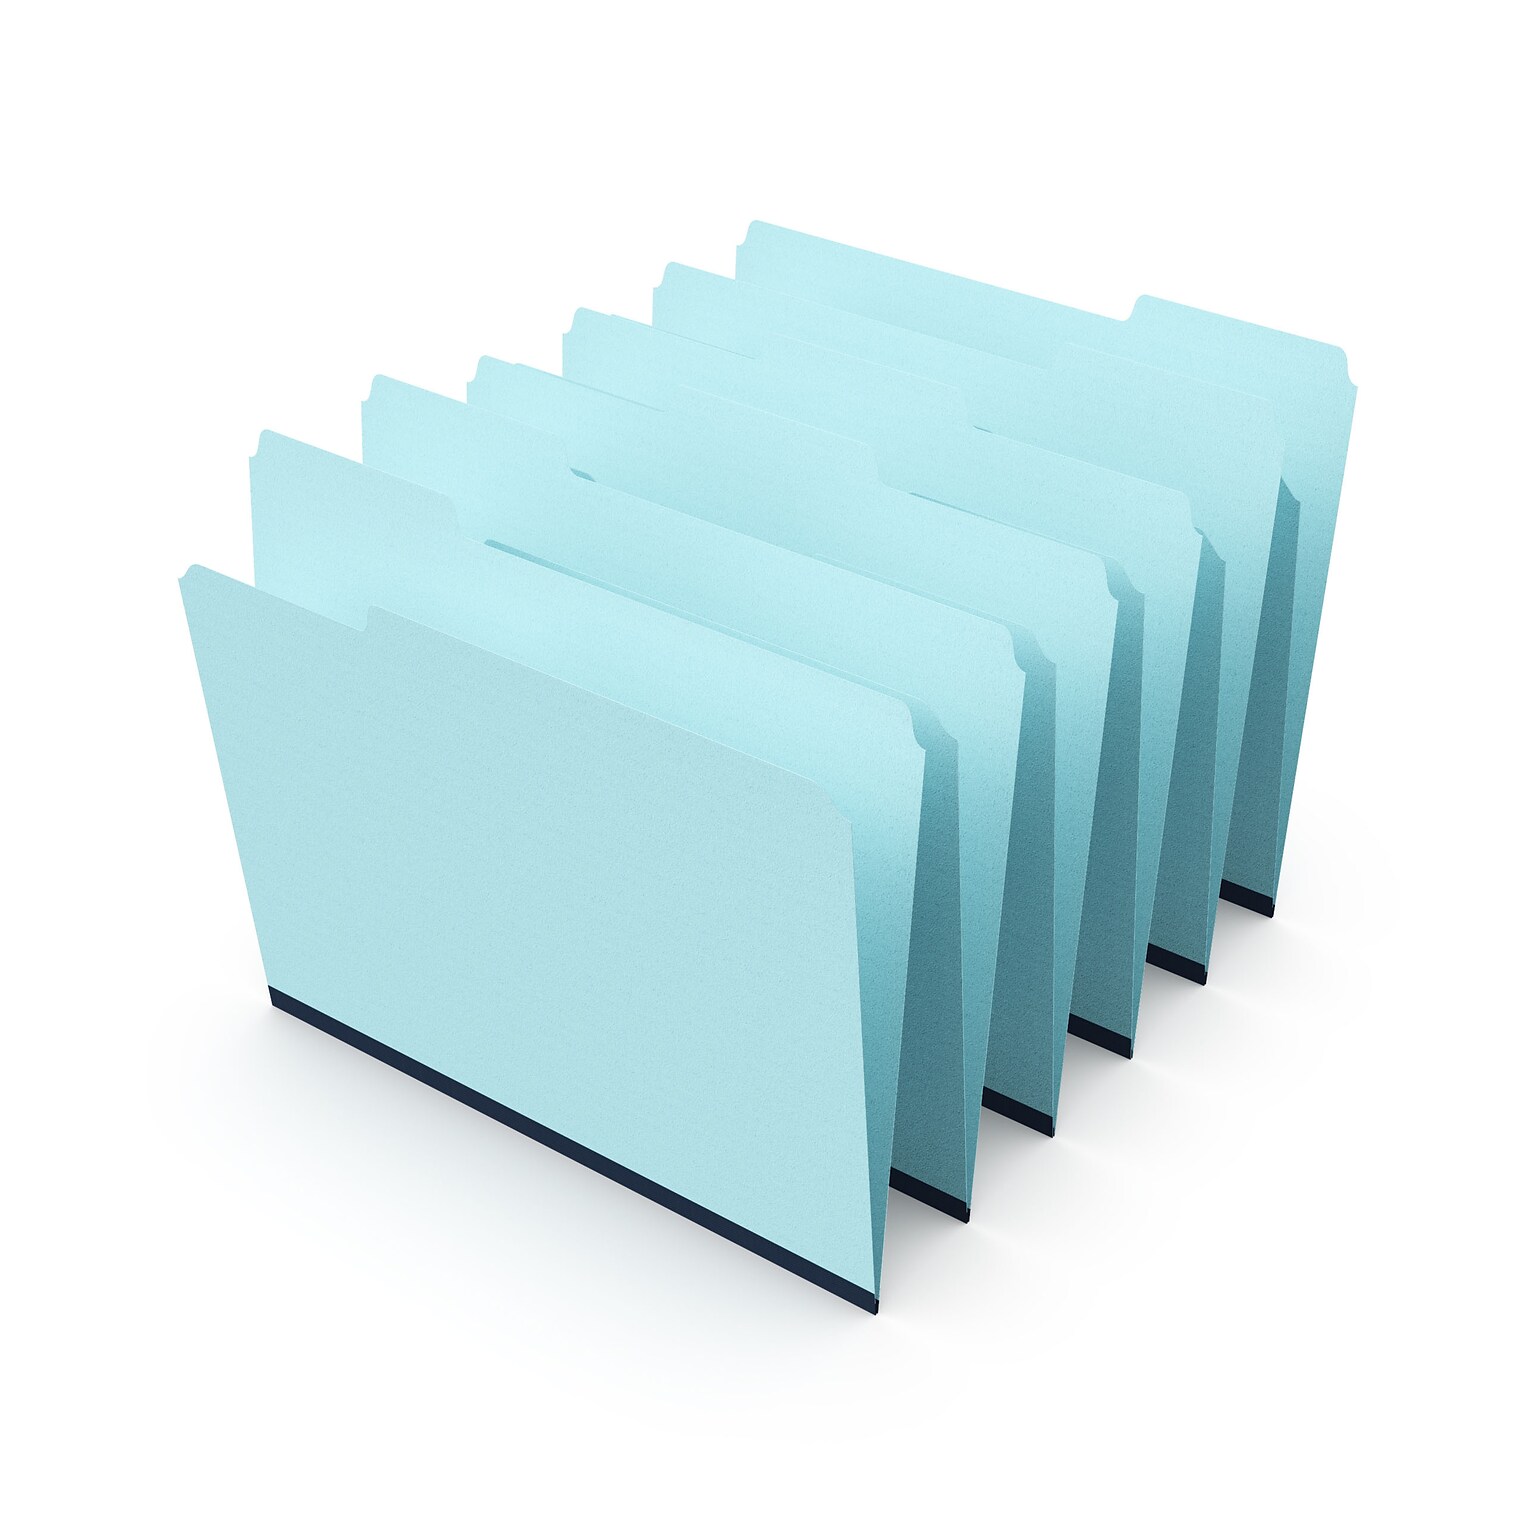 Staples 60% Recycled Heavyweight File Folders, 1/3-Cut Tab, Letter Size, Blue, 25/Box (ST606798)